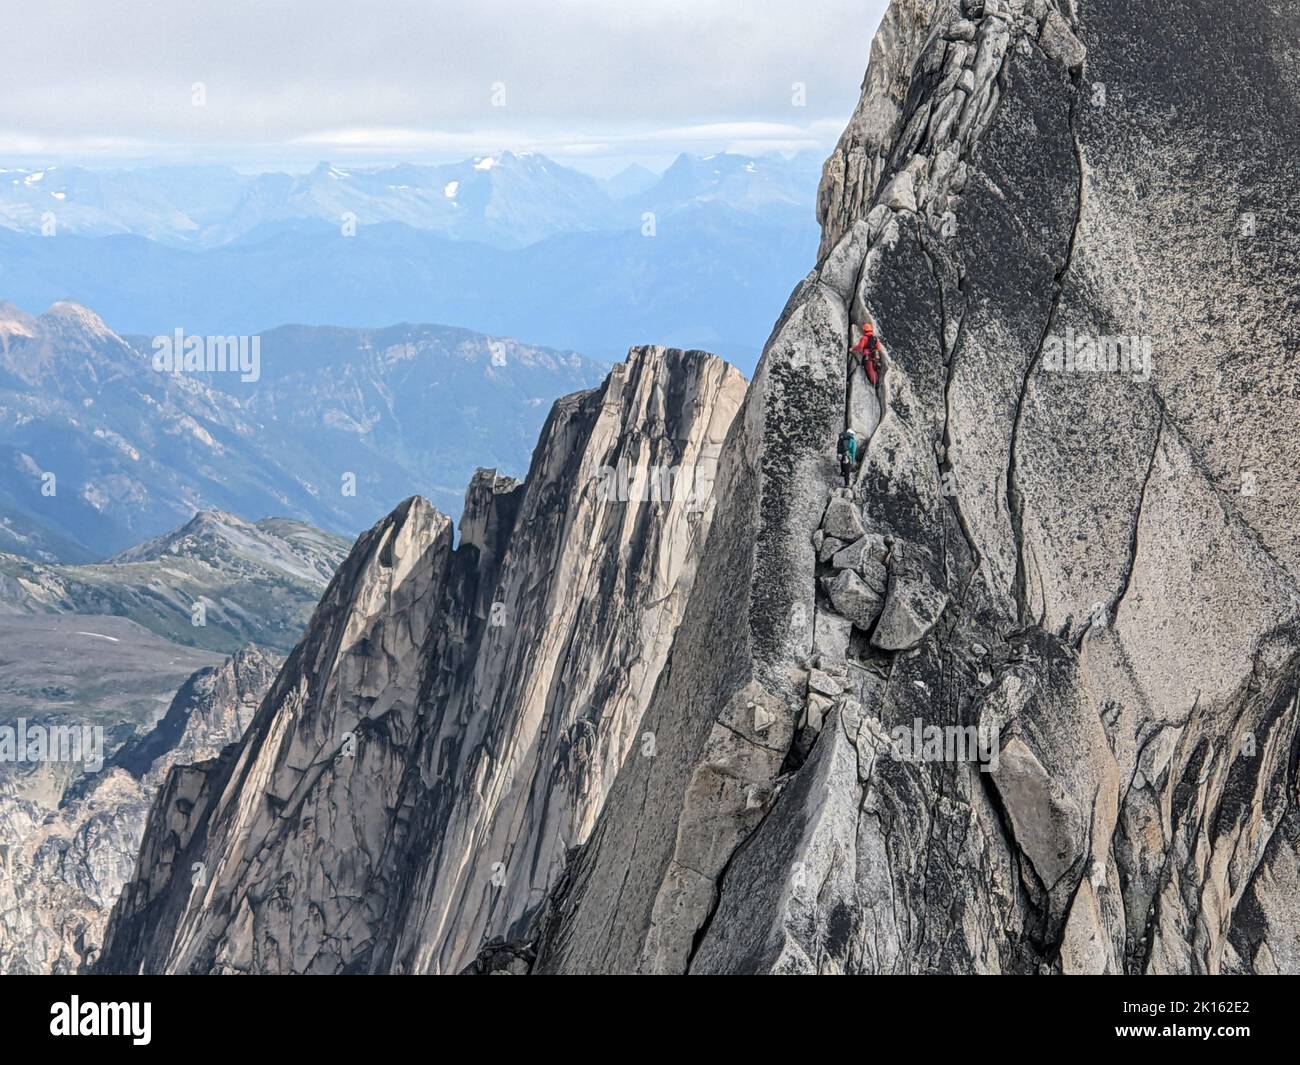 Climbers on Sheer Rock Face Pigeon Spire Stock Photo